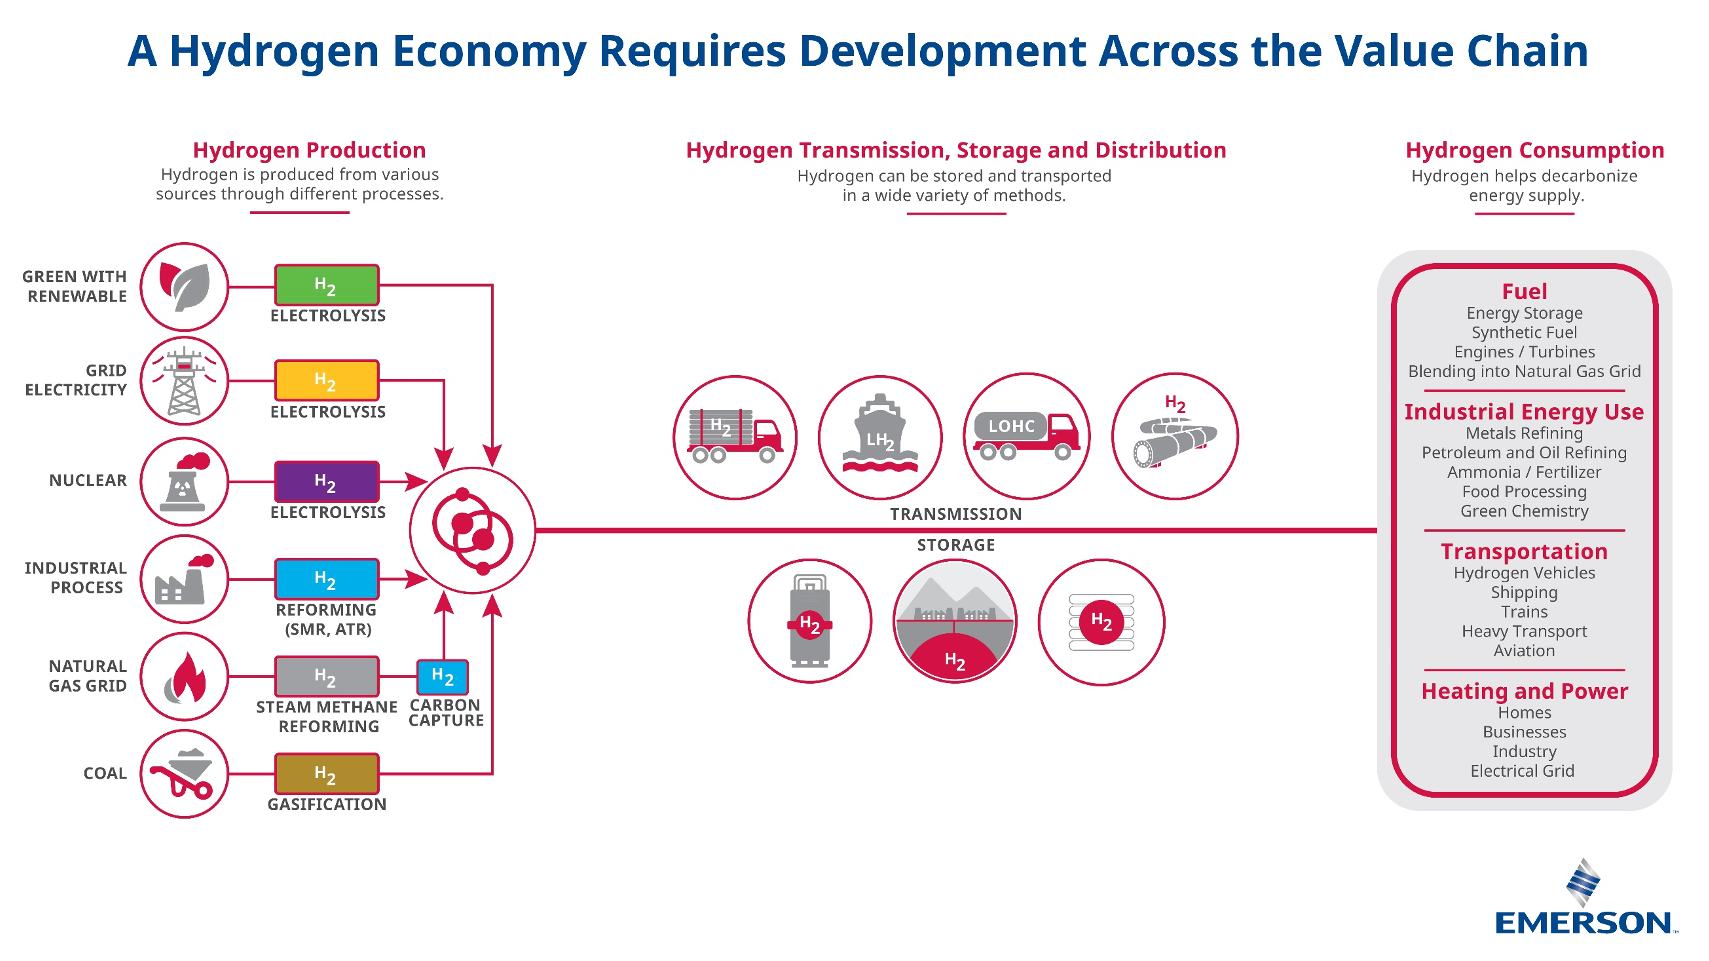 A Hydrogen Economy Required Development Across the Value Chain